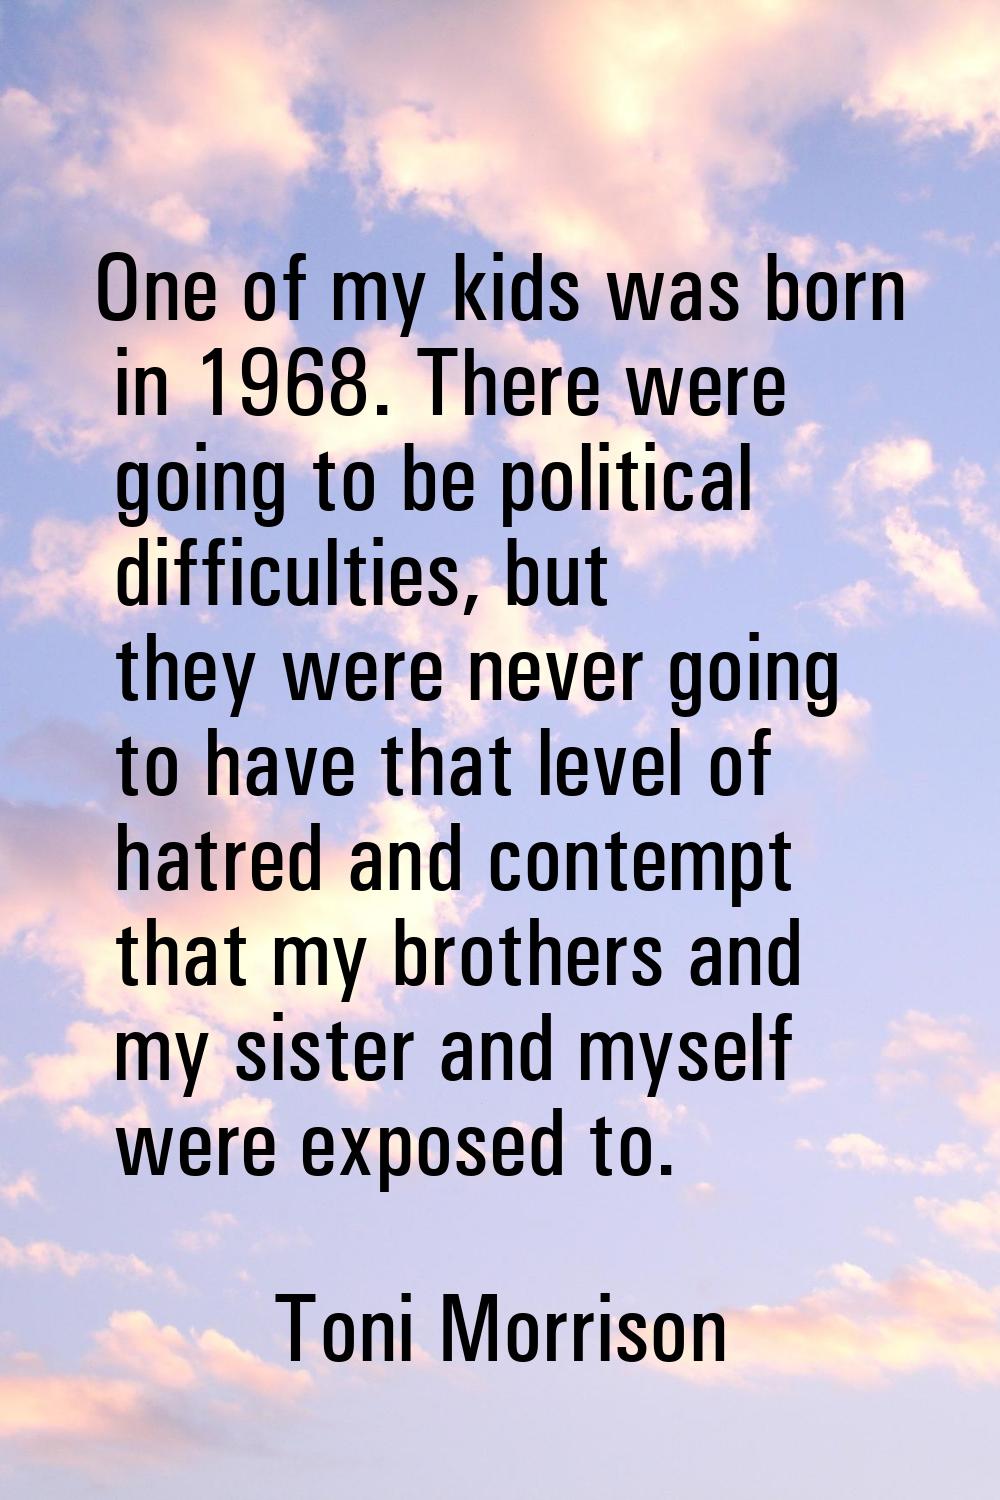 One of my kids was born in 1968. There were going to be political difficulties, but they were never